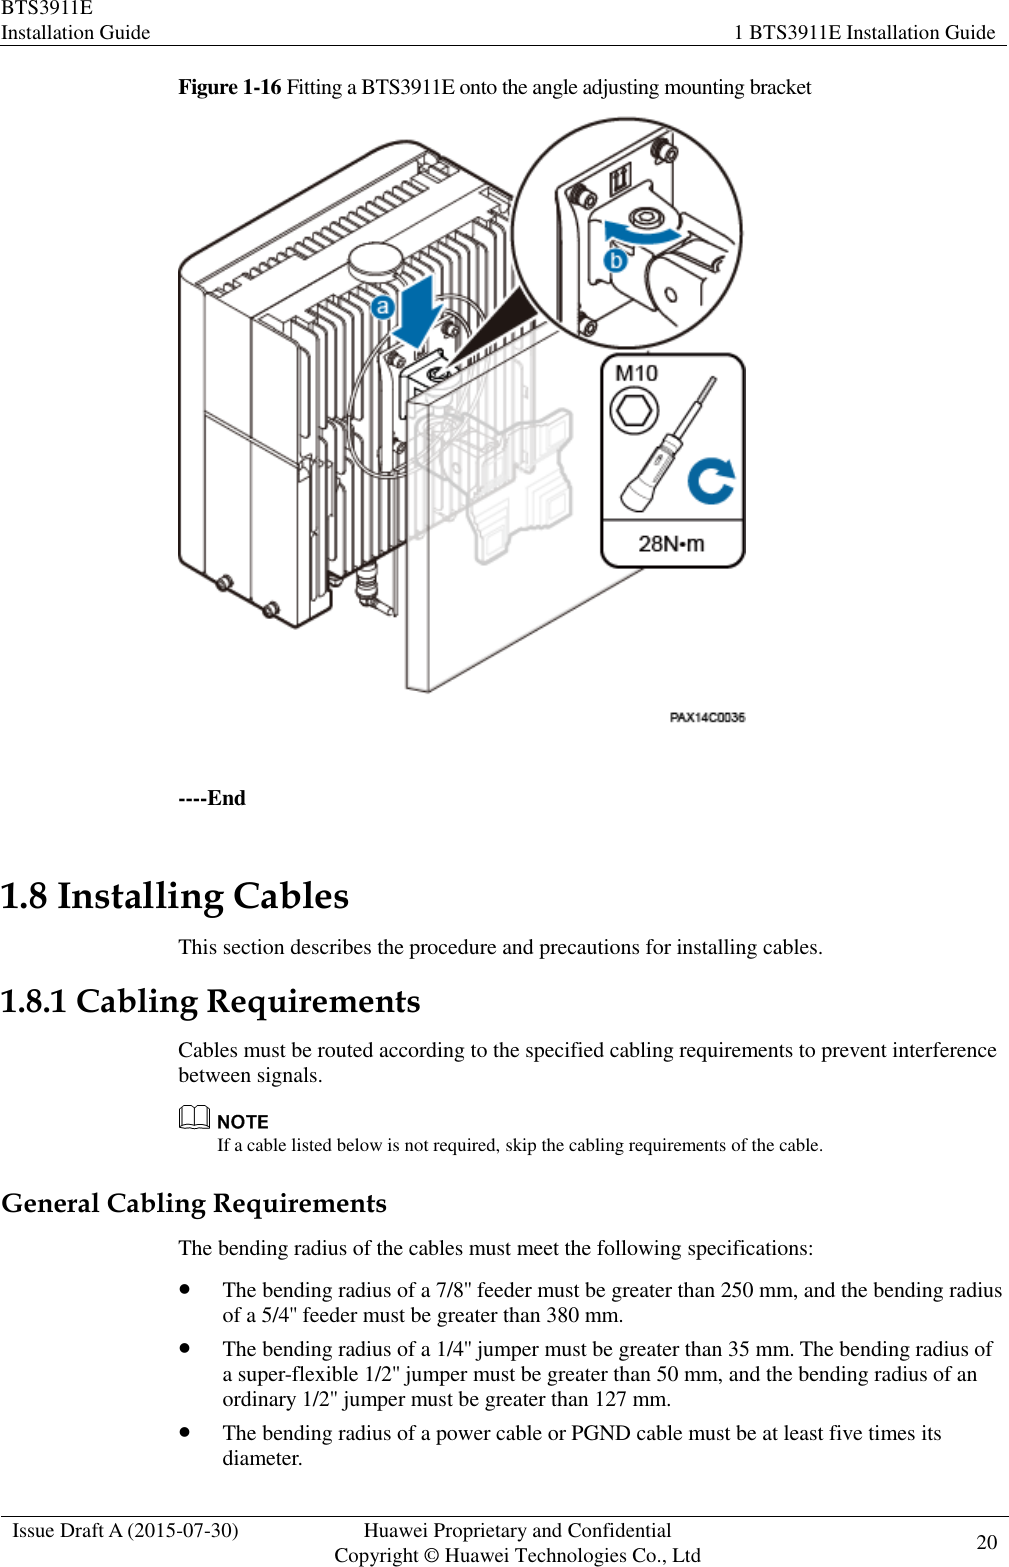 BTS3911E Installation Guide 1 BTS3911E Installation Guide  Issue Draft A (2015-07-30) Huawei Proprietary and Confidential           Copyright © Huawei Technologies Co., Ltd 20    Figure 1-16 Fitting a BTS3911E onto the angle adjusting mounting bracket   ----End 1.8 Installing Cables This section describes the procedure and precautions for installing cables. 1.8.1 Cabling Requirements Cables must be routed according to the specified cabling requirements to prevent interference between signals.  If a cable listed below is not required, skip the cabling requirements of the cable. General Cabling Requirements The bending radius of the cables must meet the following specifications:  The bending radius of a 7/8&apos;&apos; feeder must be greater than 250 mm, and the bending radius of a 5/4&apos;&apos; feeder must be greater than 380 mm.  The bending radius of a 1/4&apos;&apos; jumper must be greater than 35 mm. The bending radius of a super-flexible 1/2&apos;&apos; jumper must be greater than 50 mm, and the bending radius of an ordinary 1/2&apos;&apos; jumper must be greater than 127 mm.  The bending radius of a power cable or PGND cable must be at least five times its diameter. 